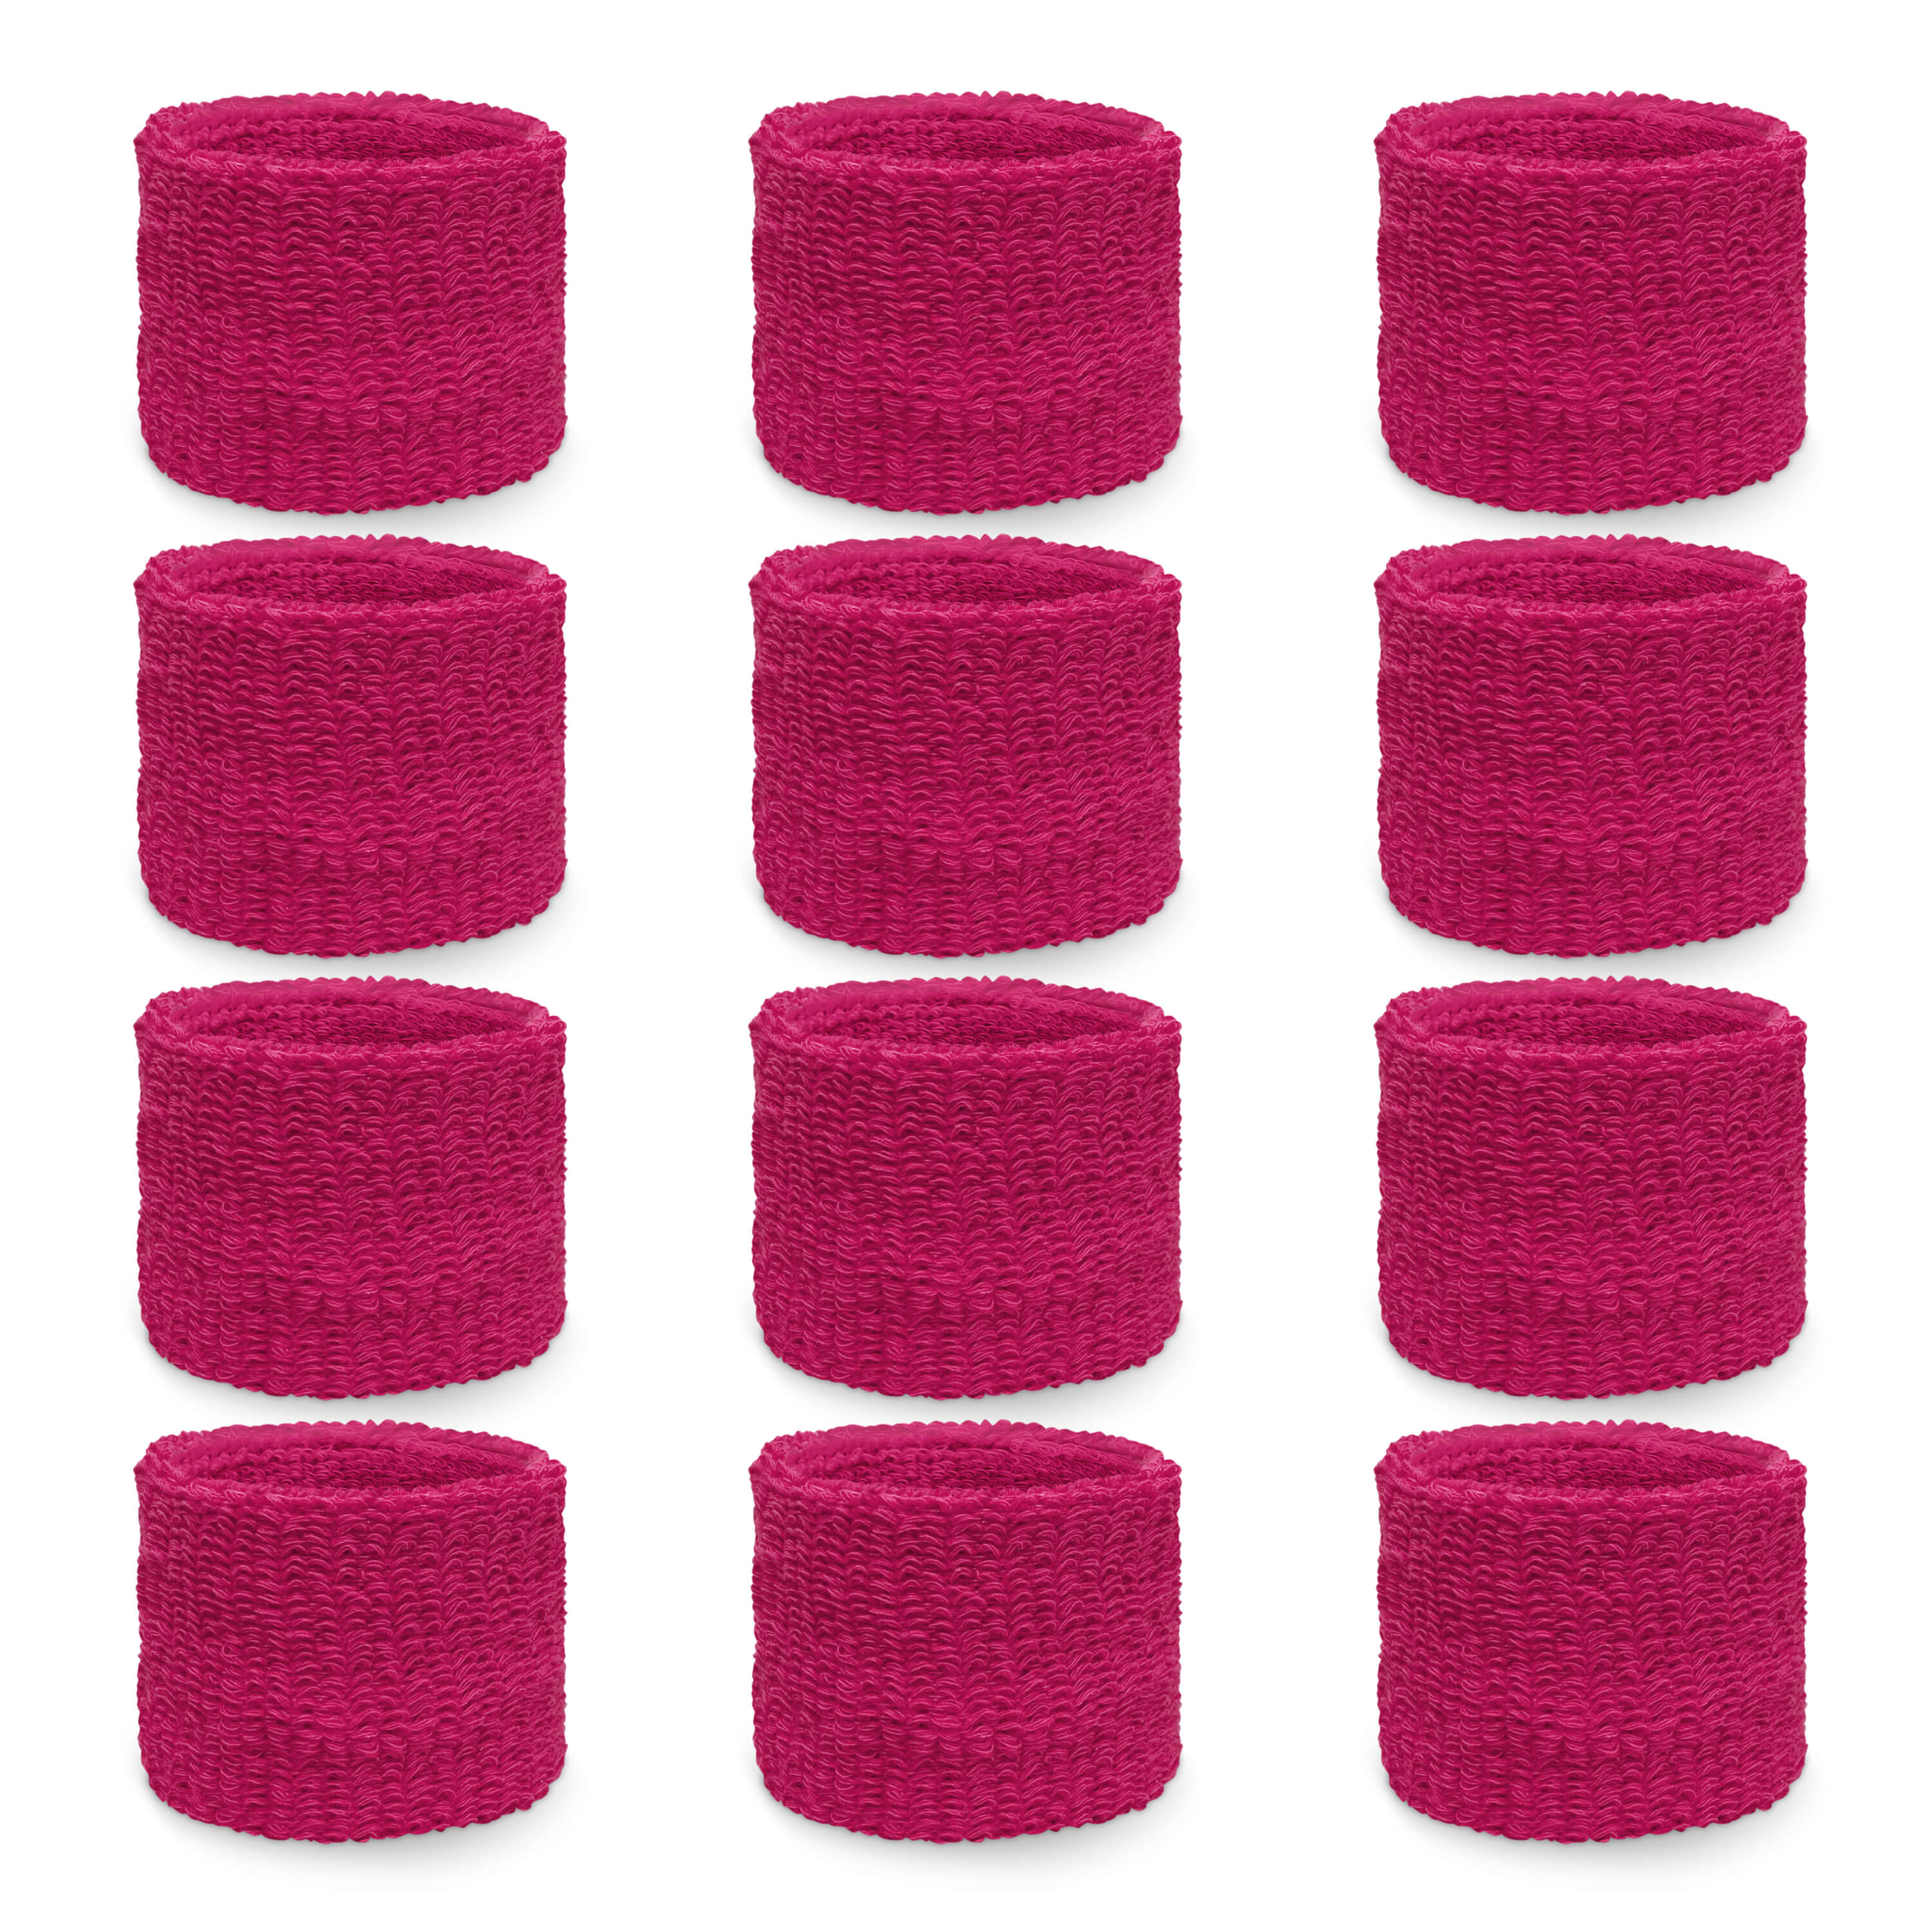 Youth Hot Pink Wristband Wholesale for School 6pairs